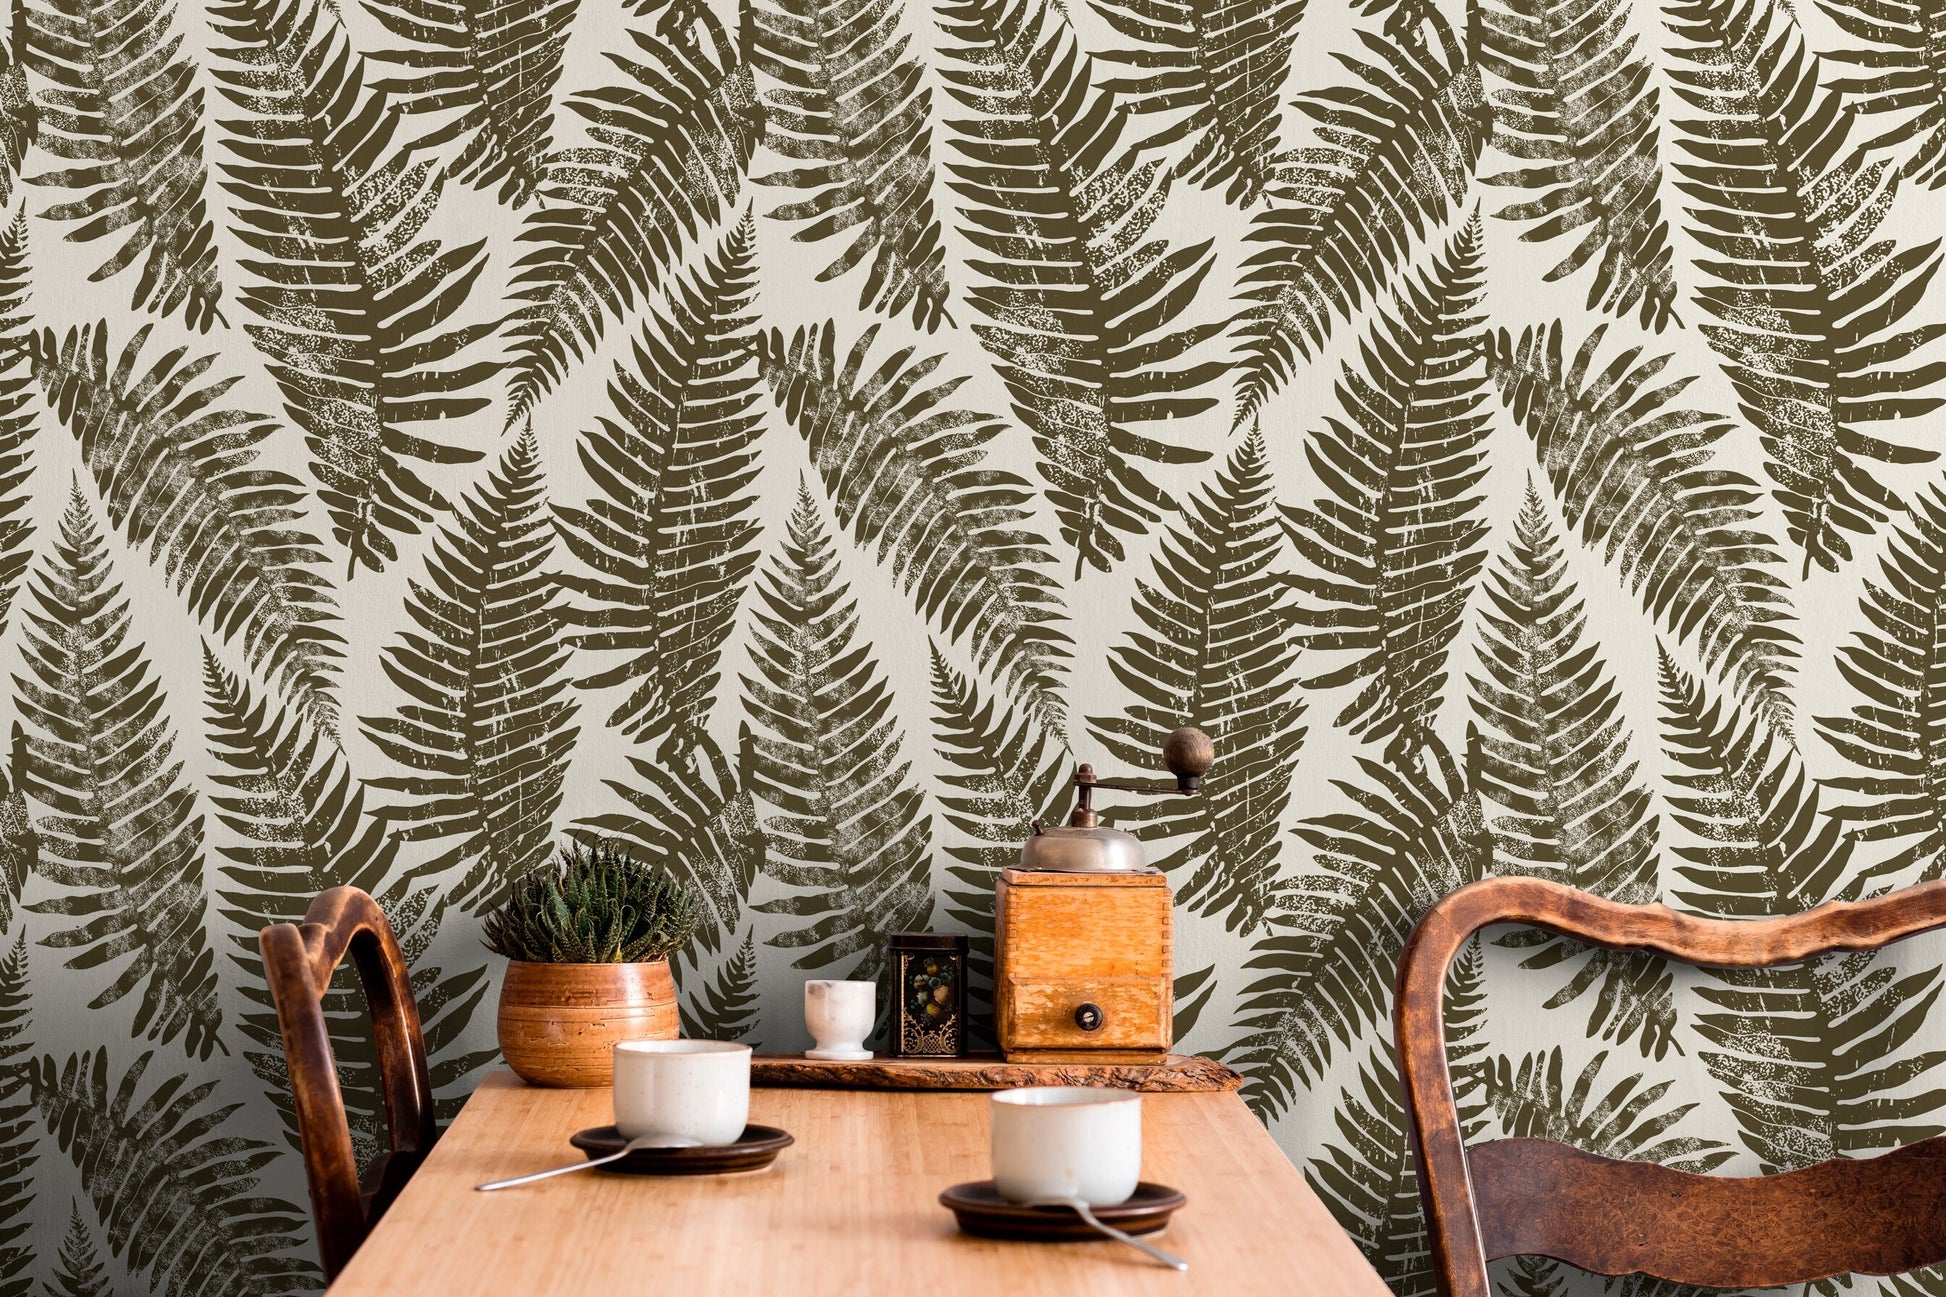 Removable Wallpaper, Peel and Stick Wallpaper, Removable Wallpaper, Wall Paper Removable, Wallpaper - C214